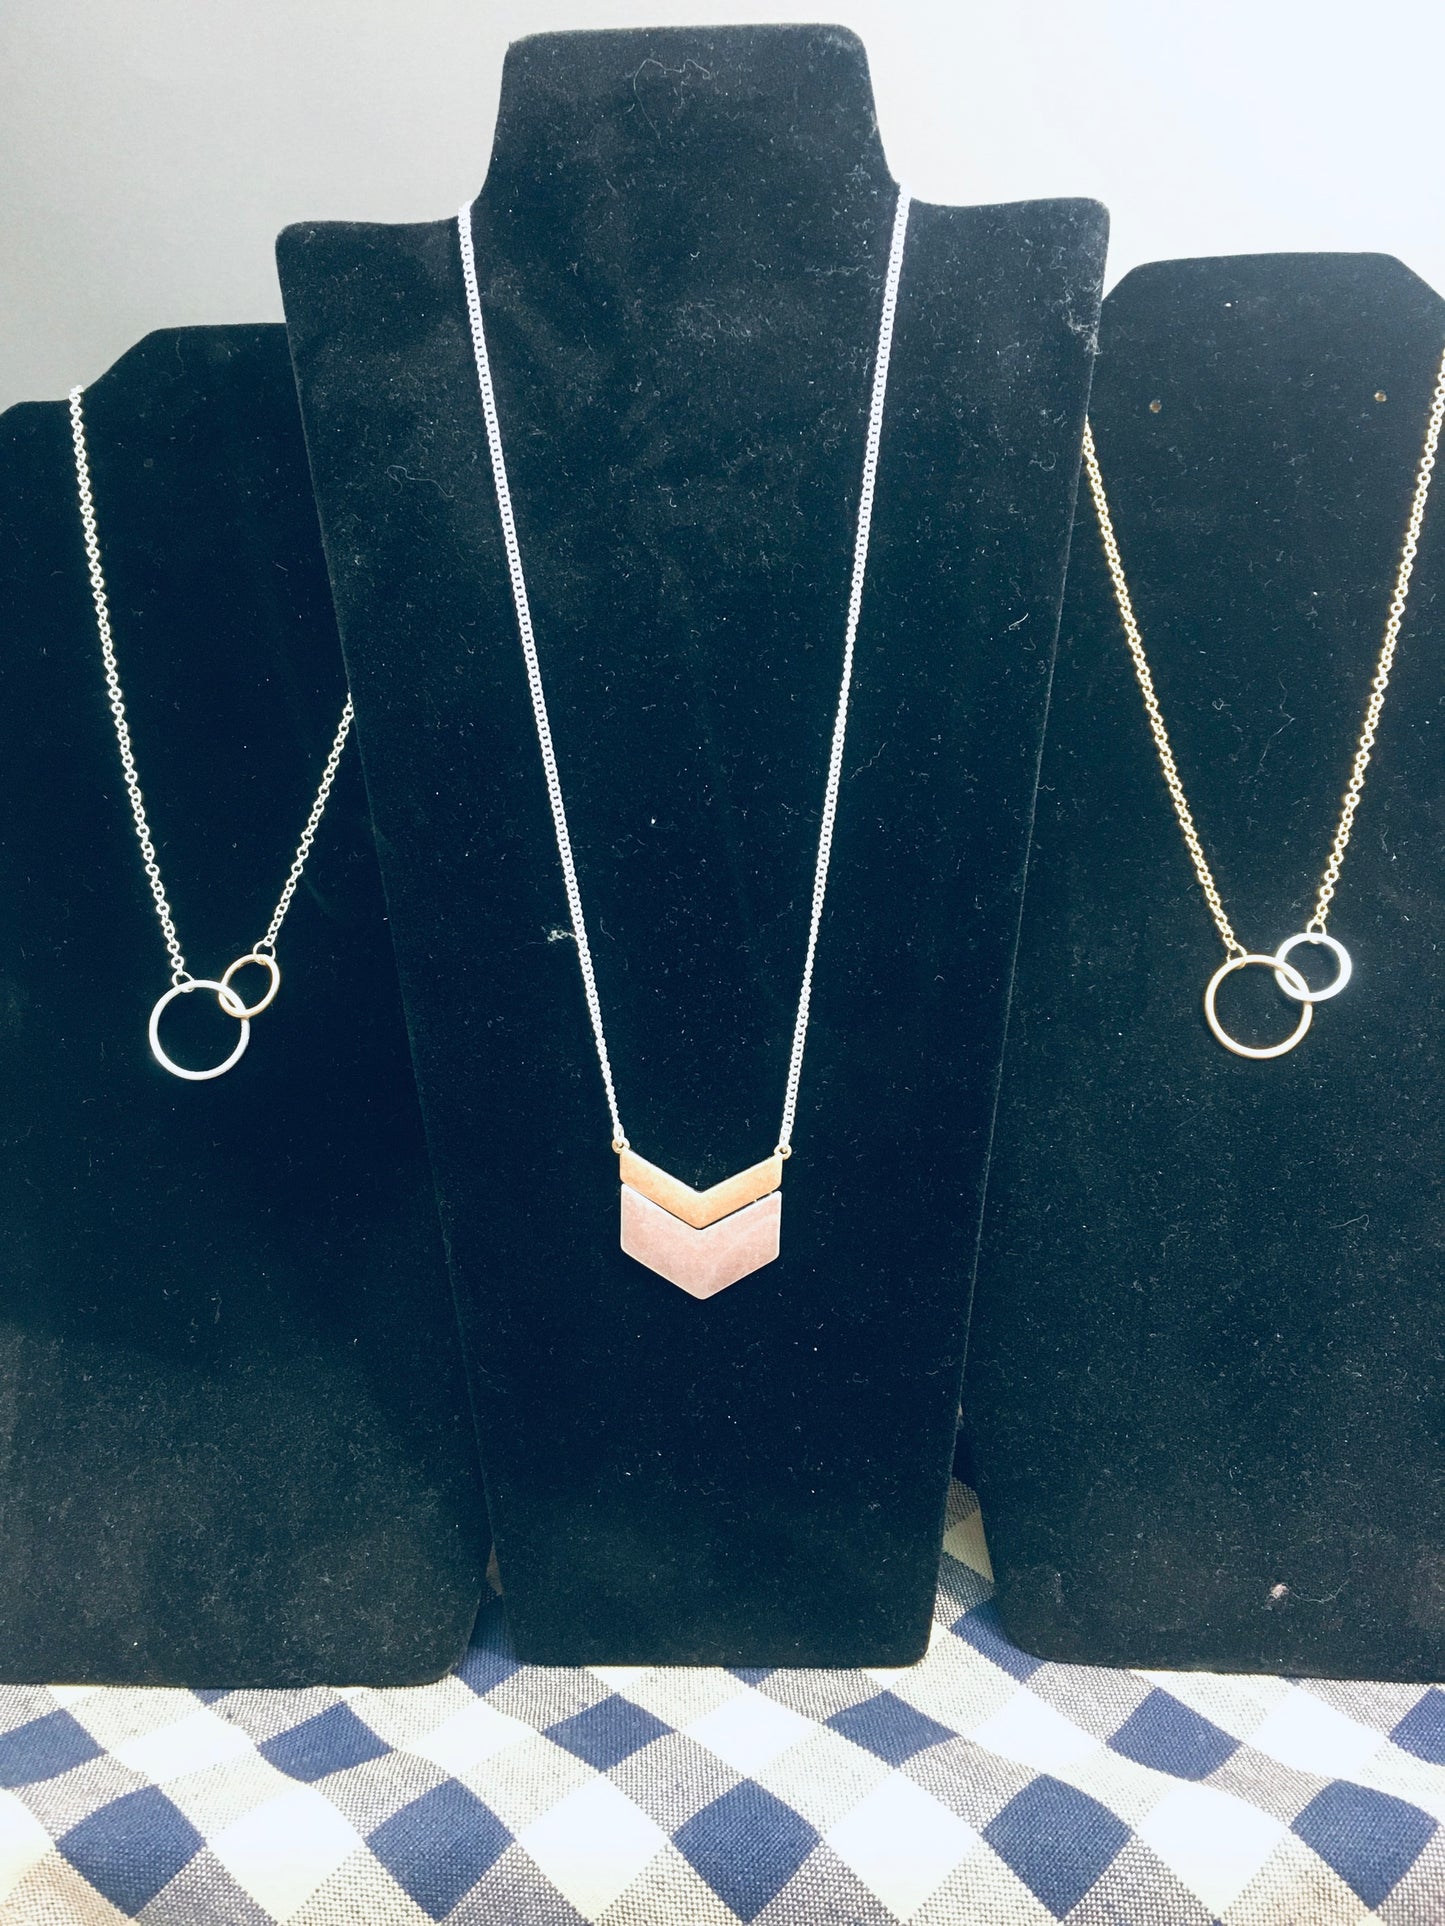 Gold silver necklaces